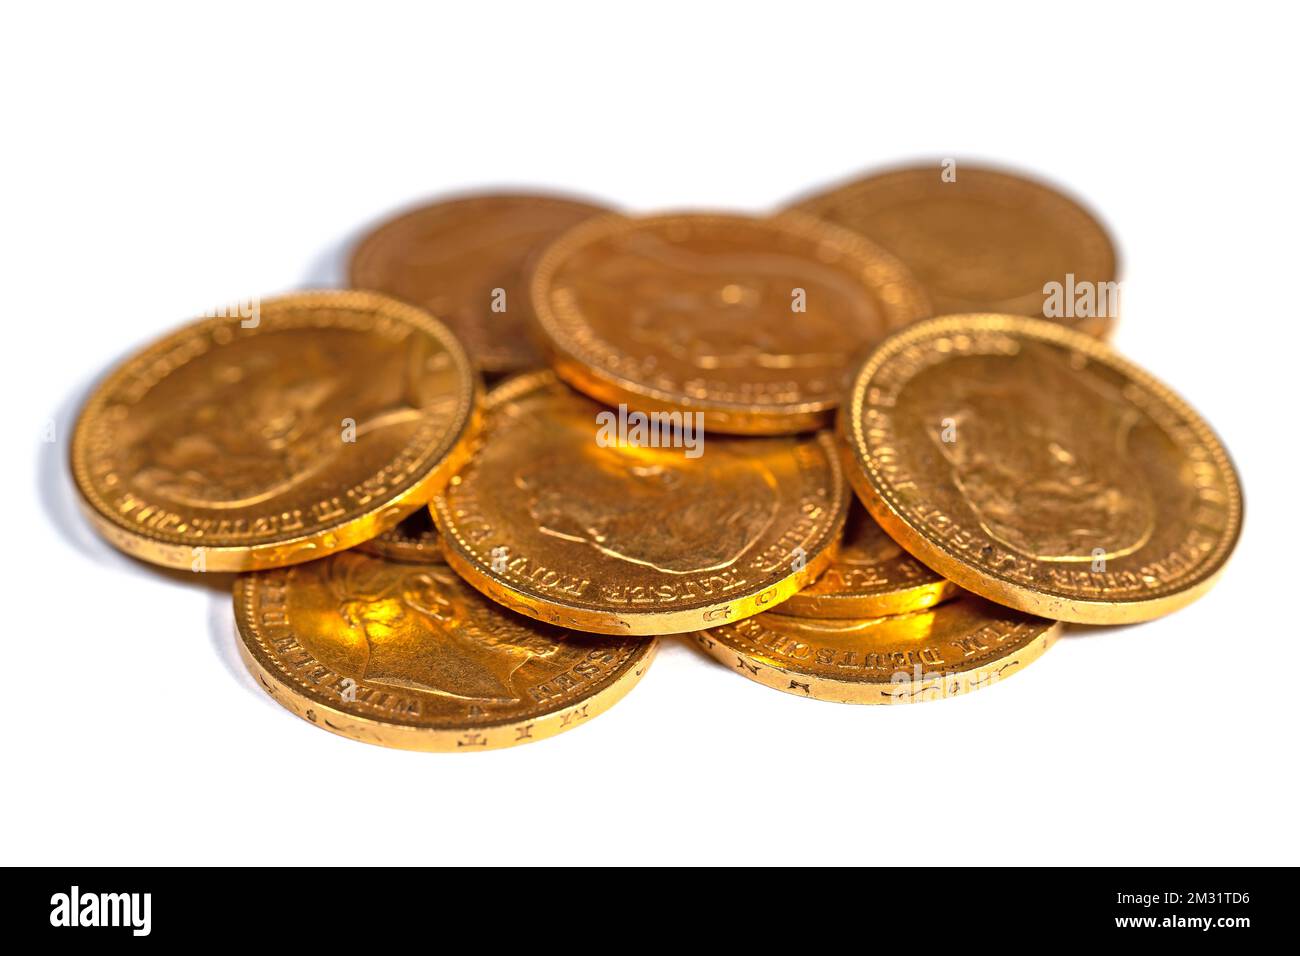 Old gold coins against white background Stock Photo